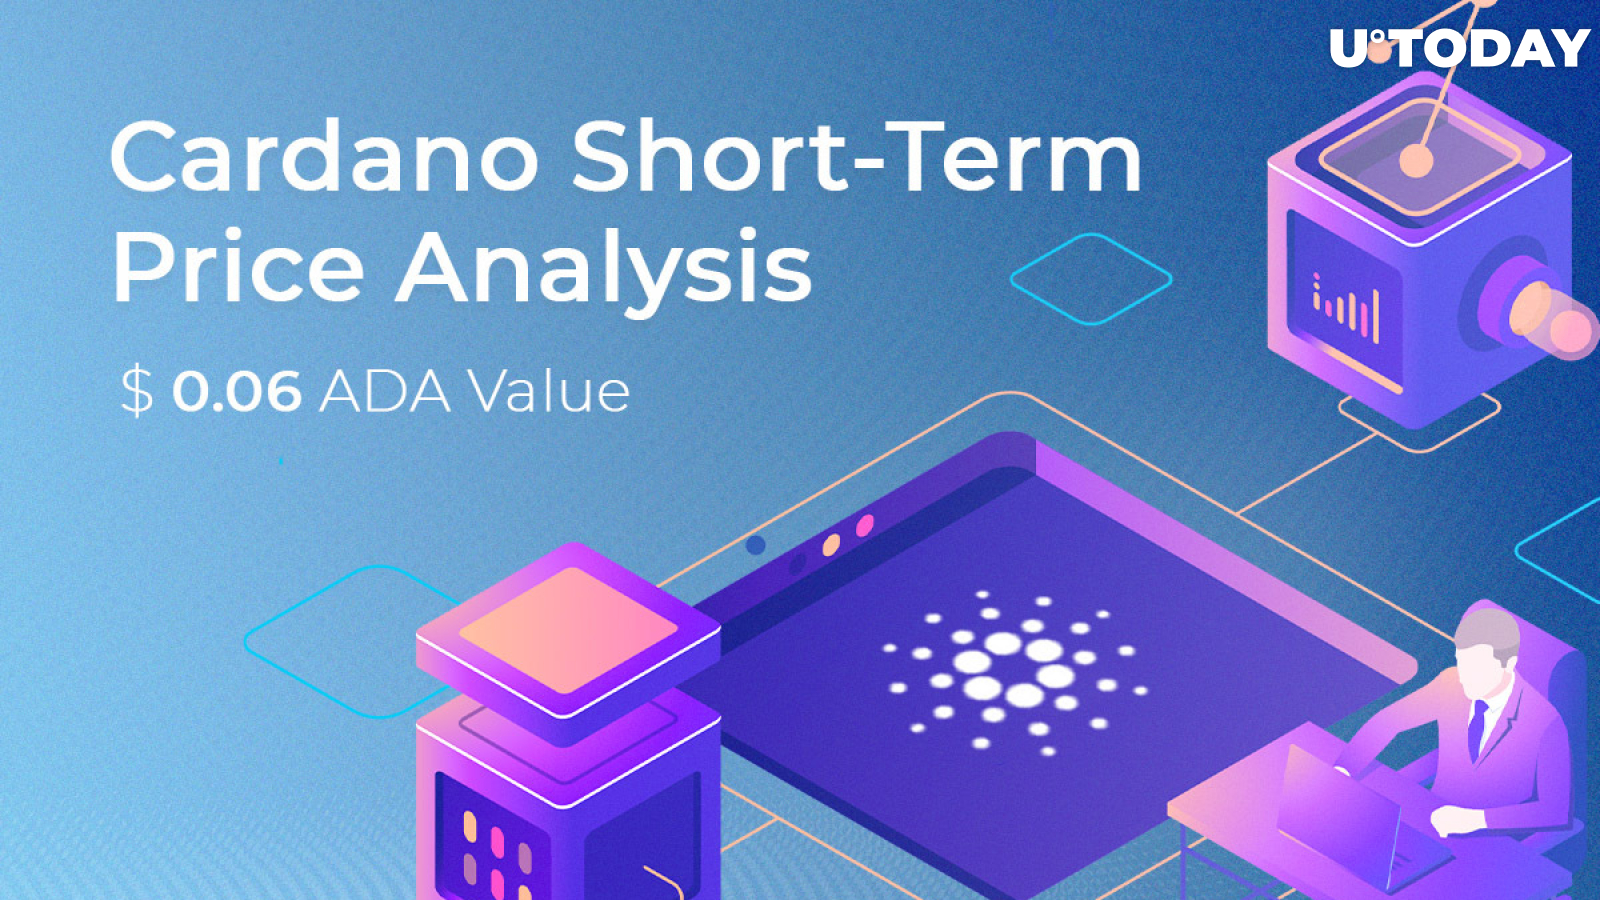 Cardano Short-Term Price Analysis: $0.06 ADA Value Is to Be Reached Soon. What Should Happen This March?